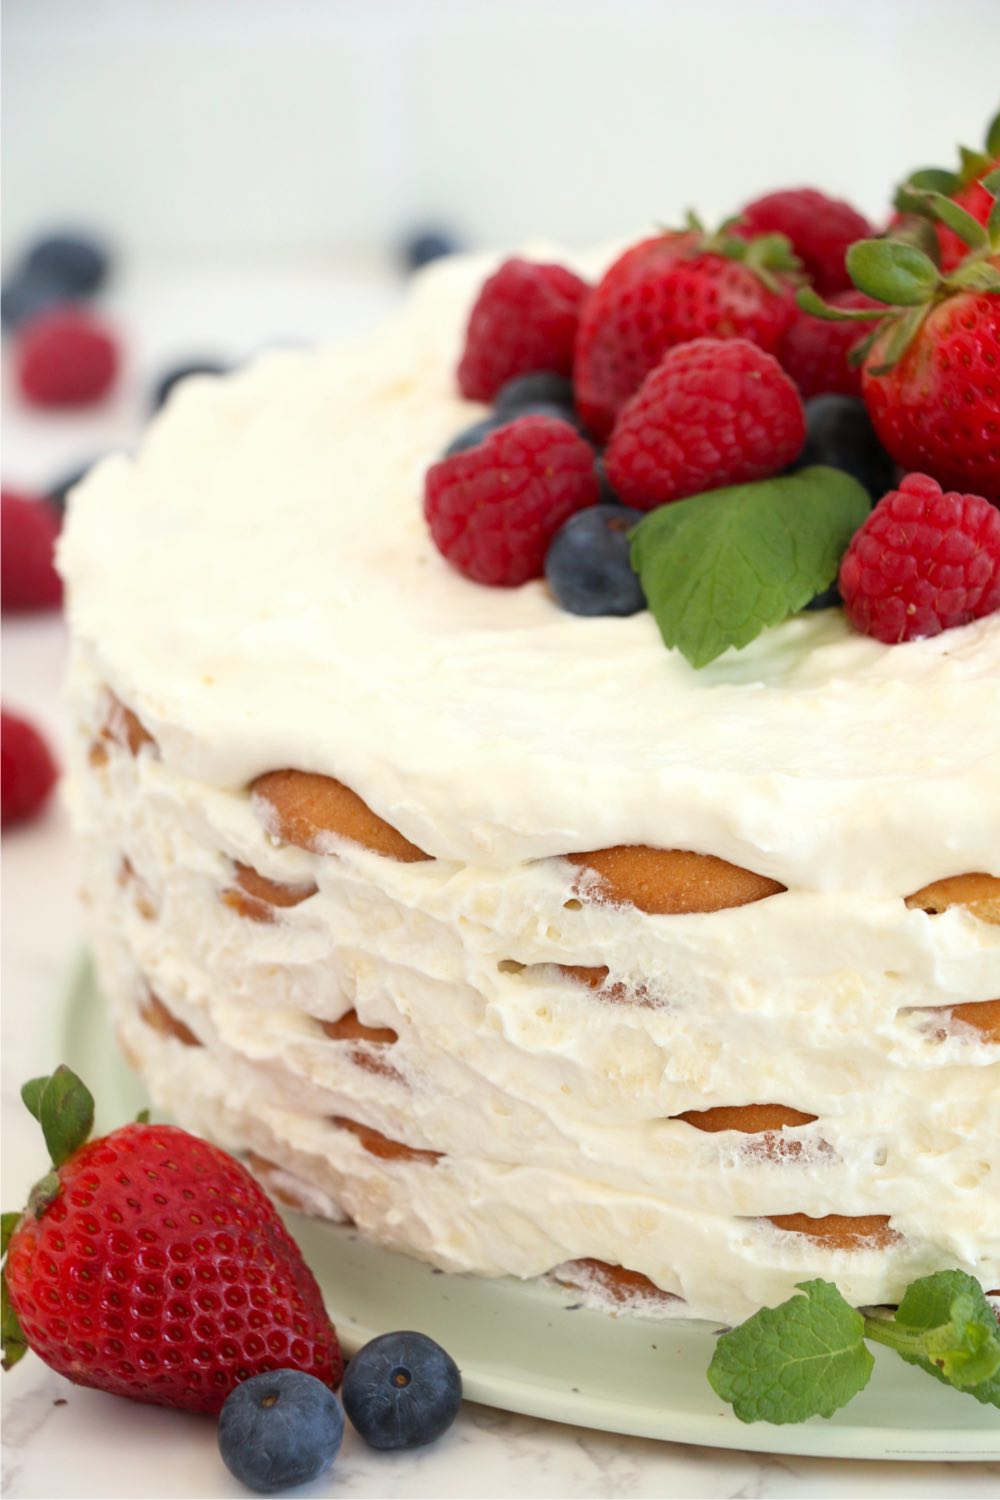 wafer layer cake topped with fresh berries